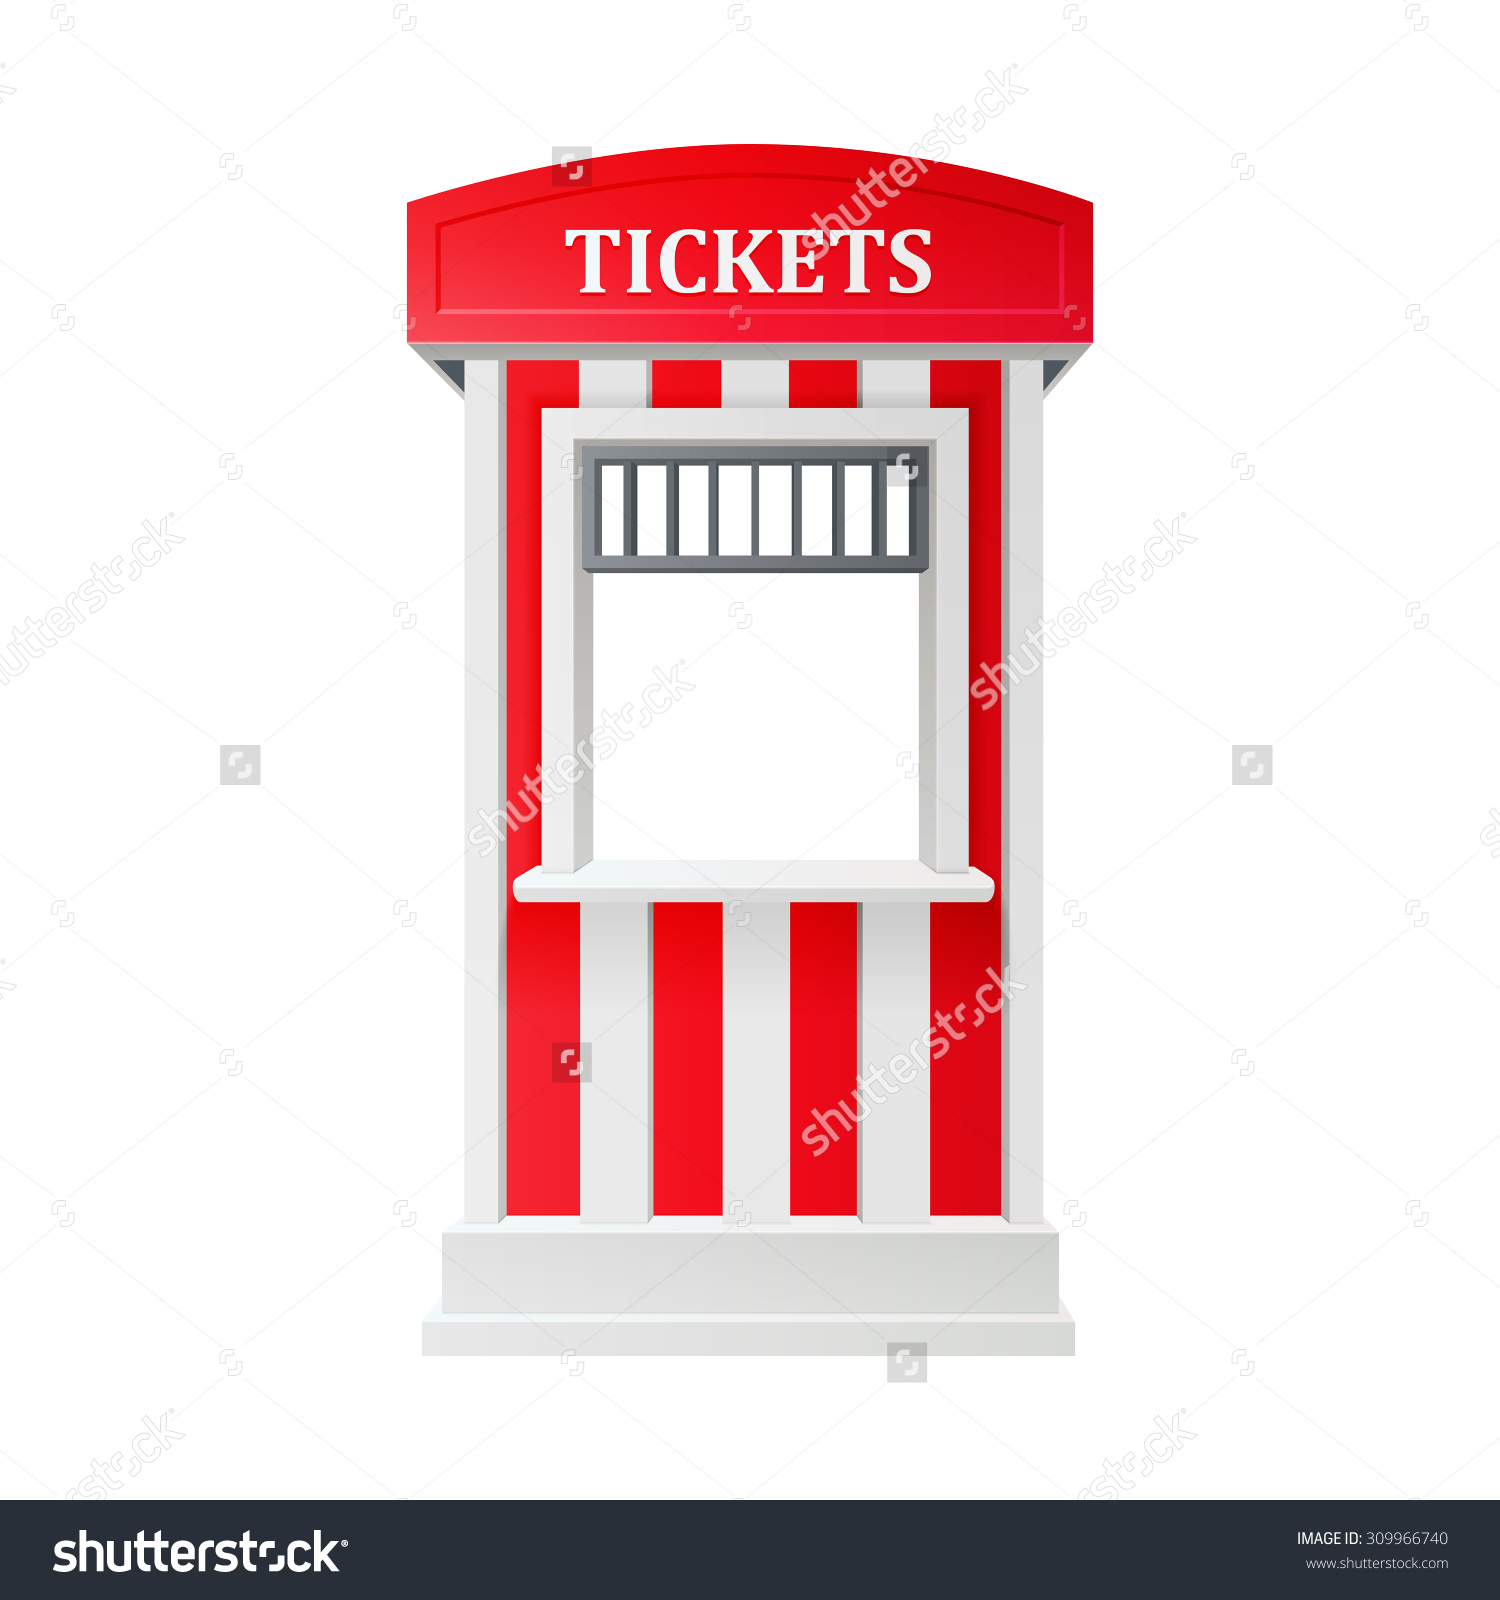 3177 Ticket free clipart.